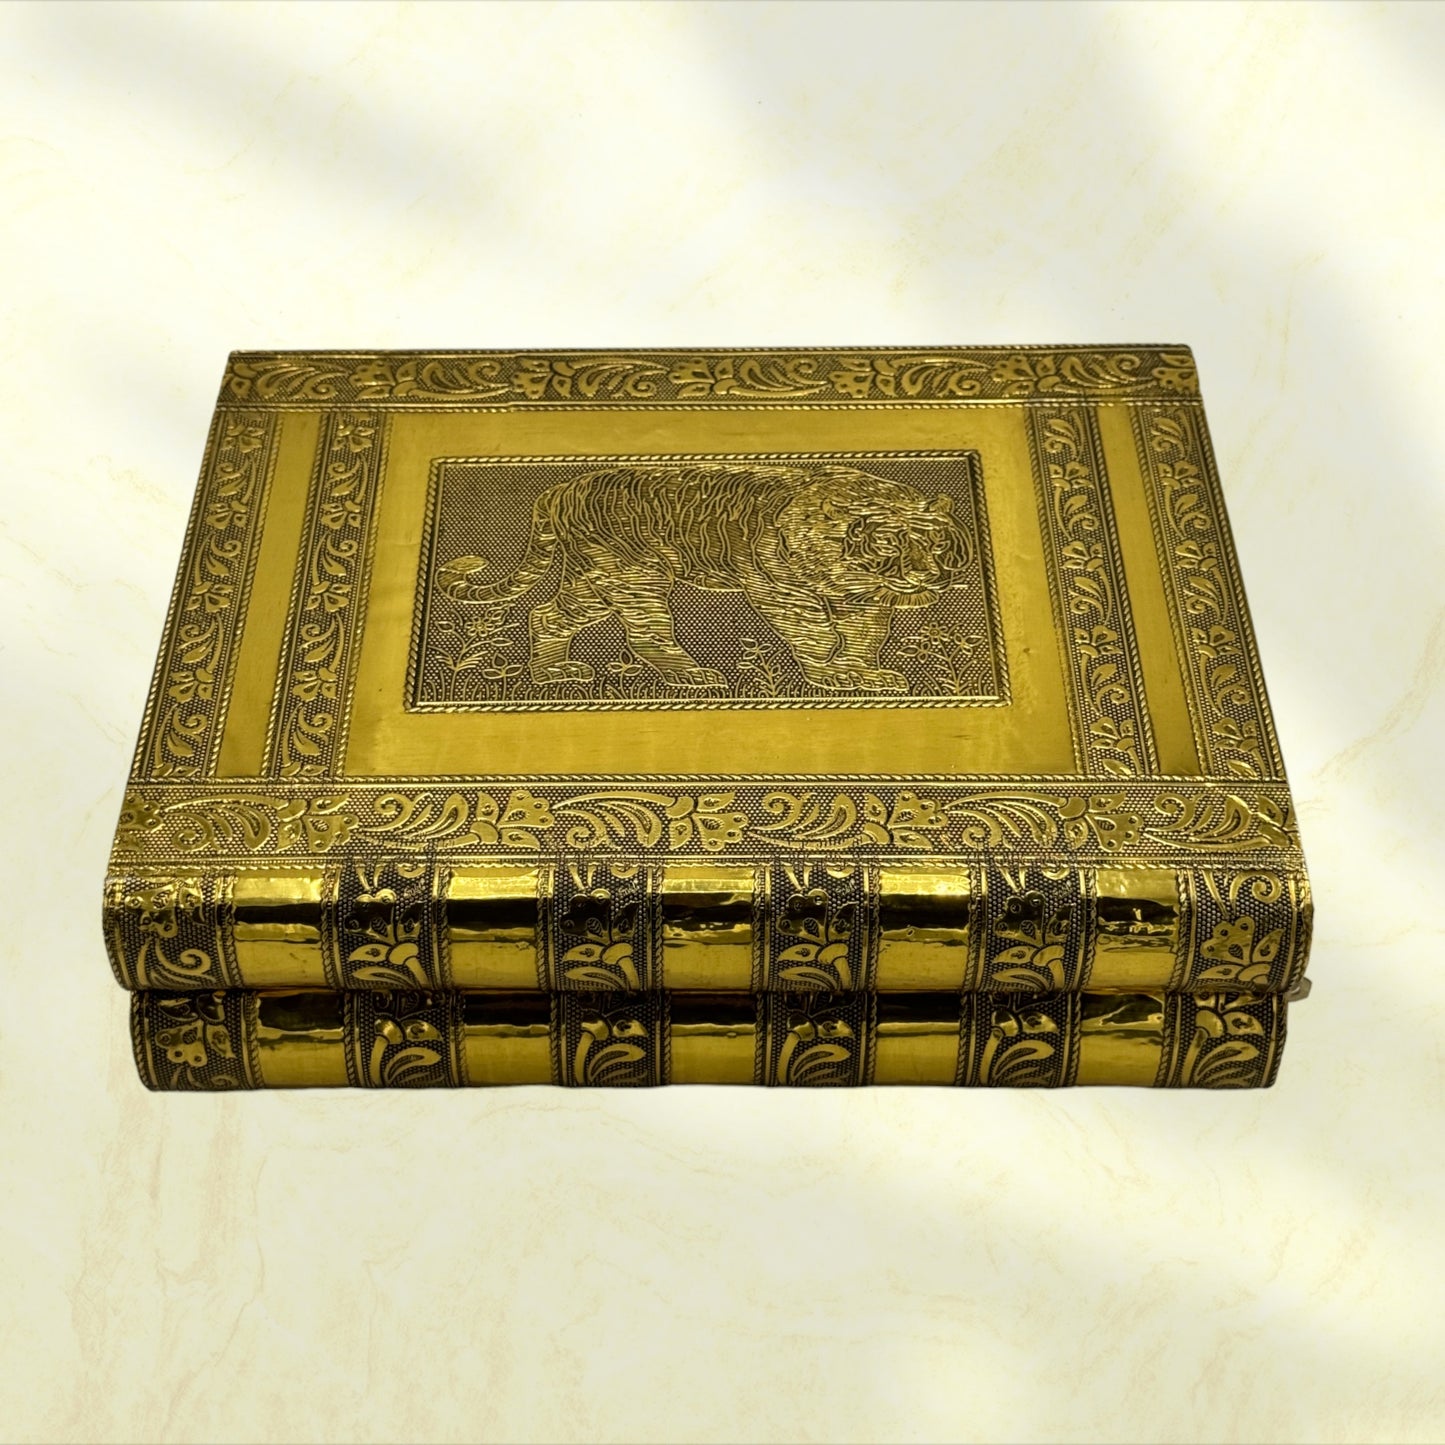 Majestic Indian Tiger Handmade Jewelry Holder Box - Tortuna shows angle of box where you can see how edges resemble a book 